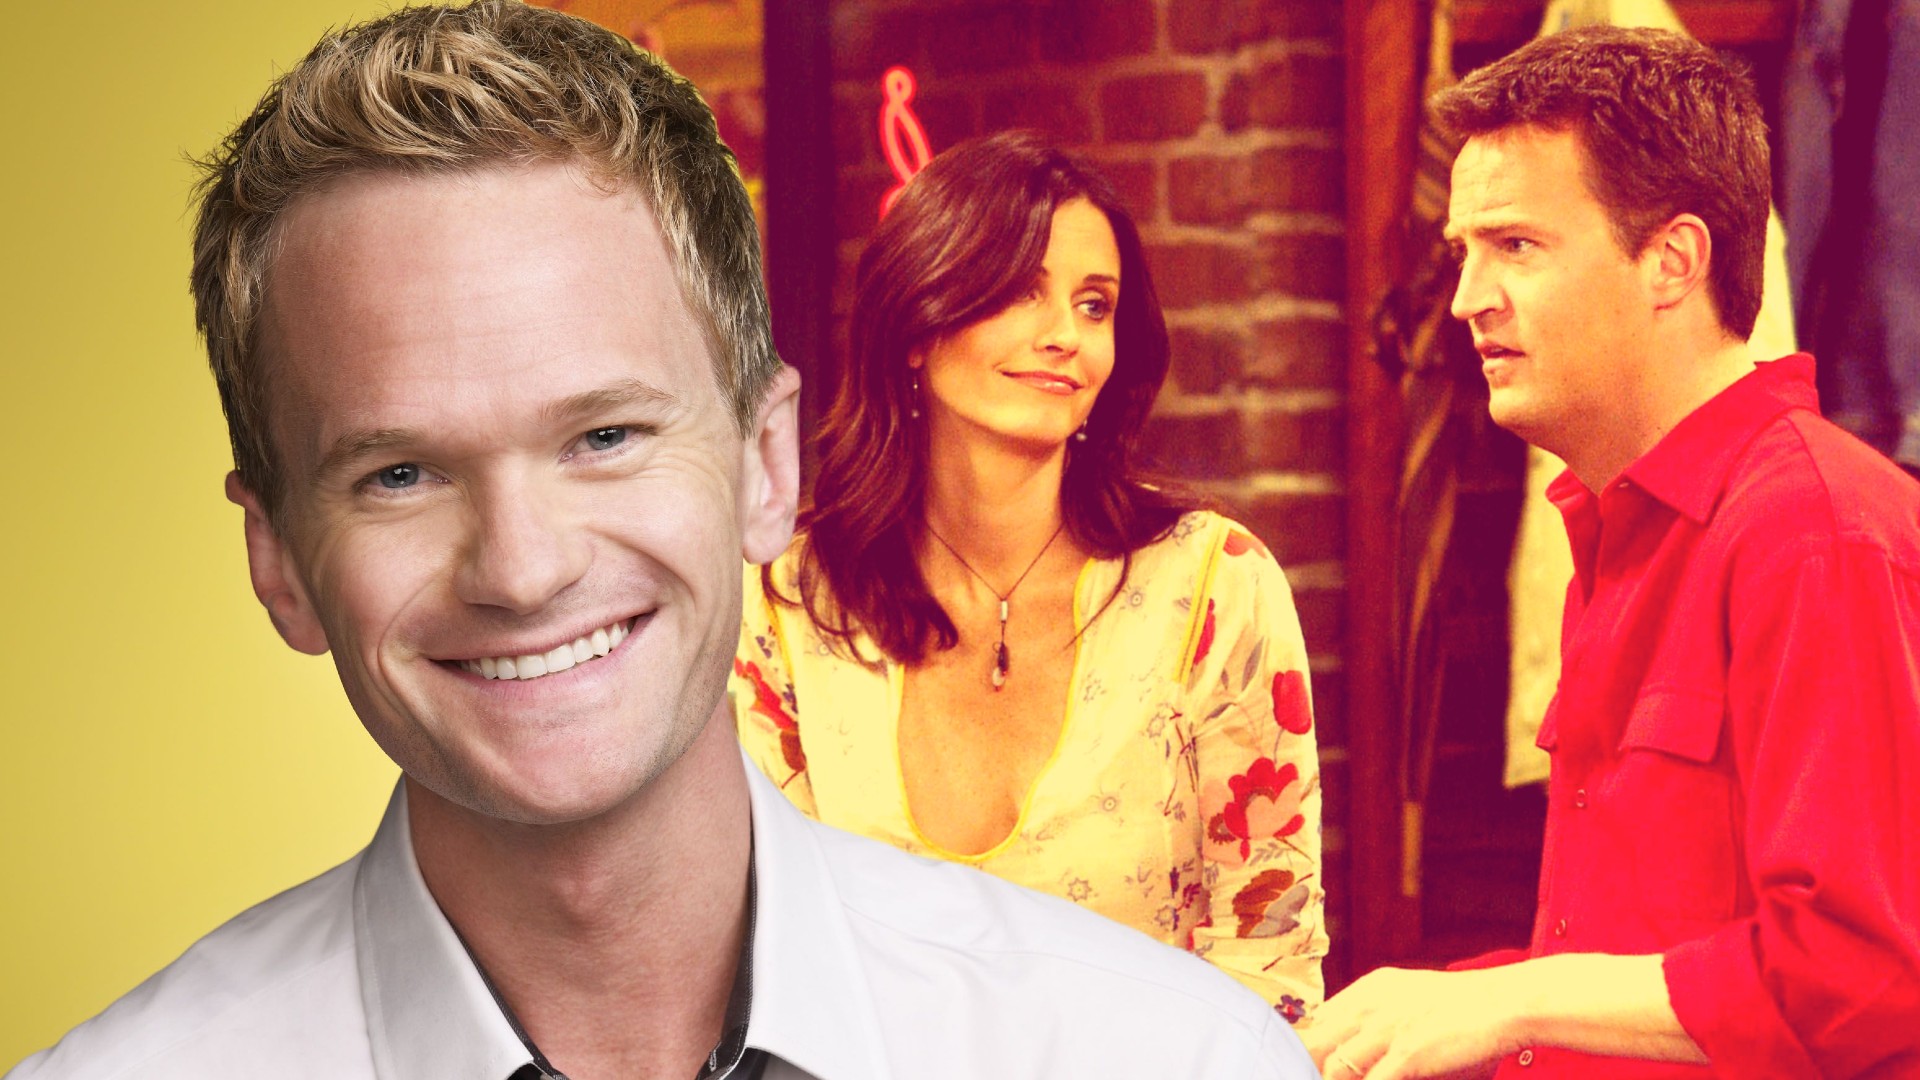 How I Met Your Mother Made the Fatal Mistake Friends Avoided